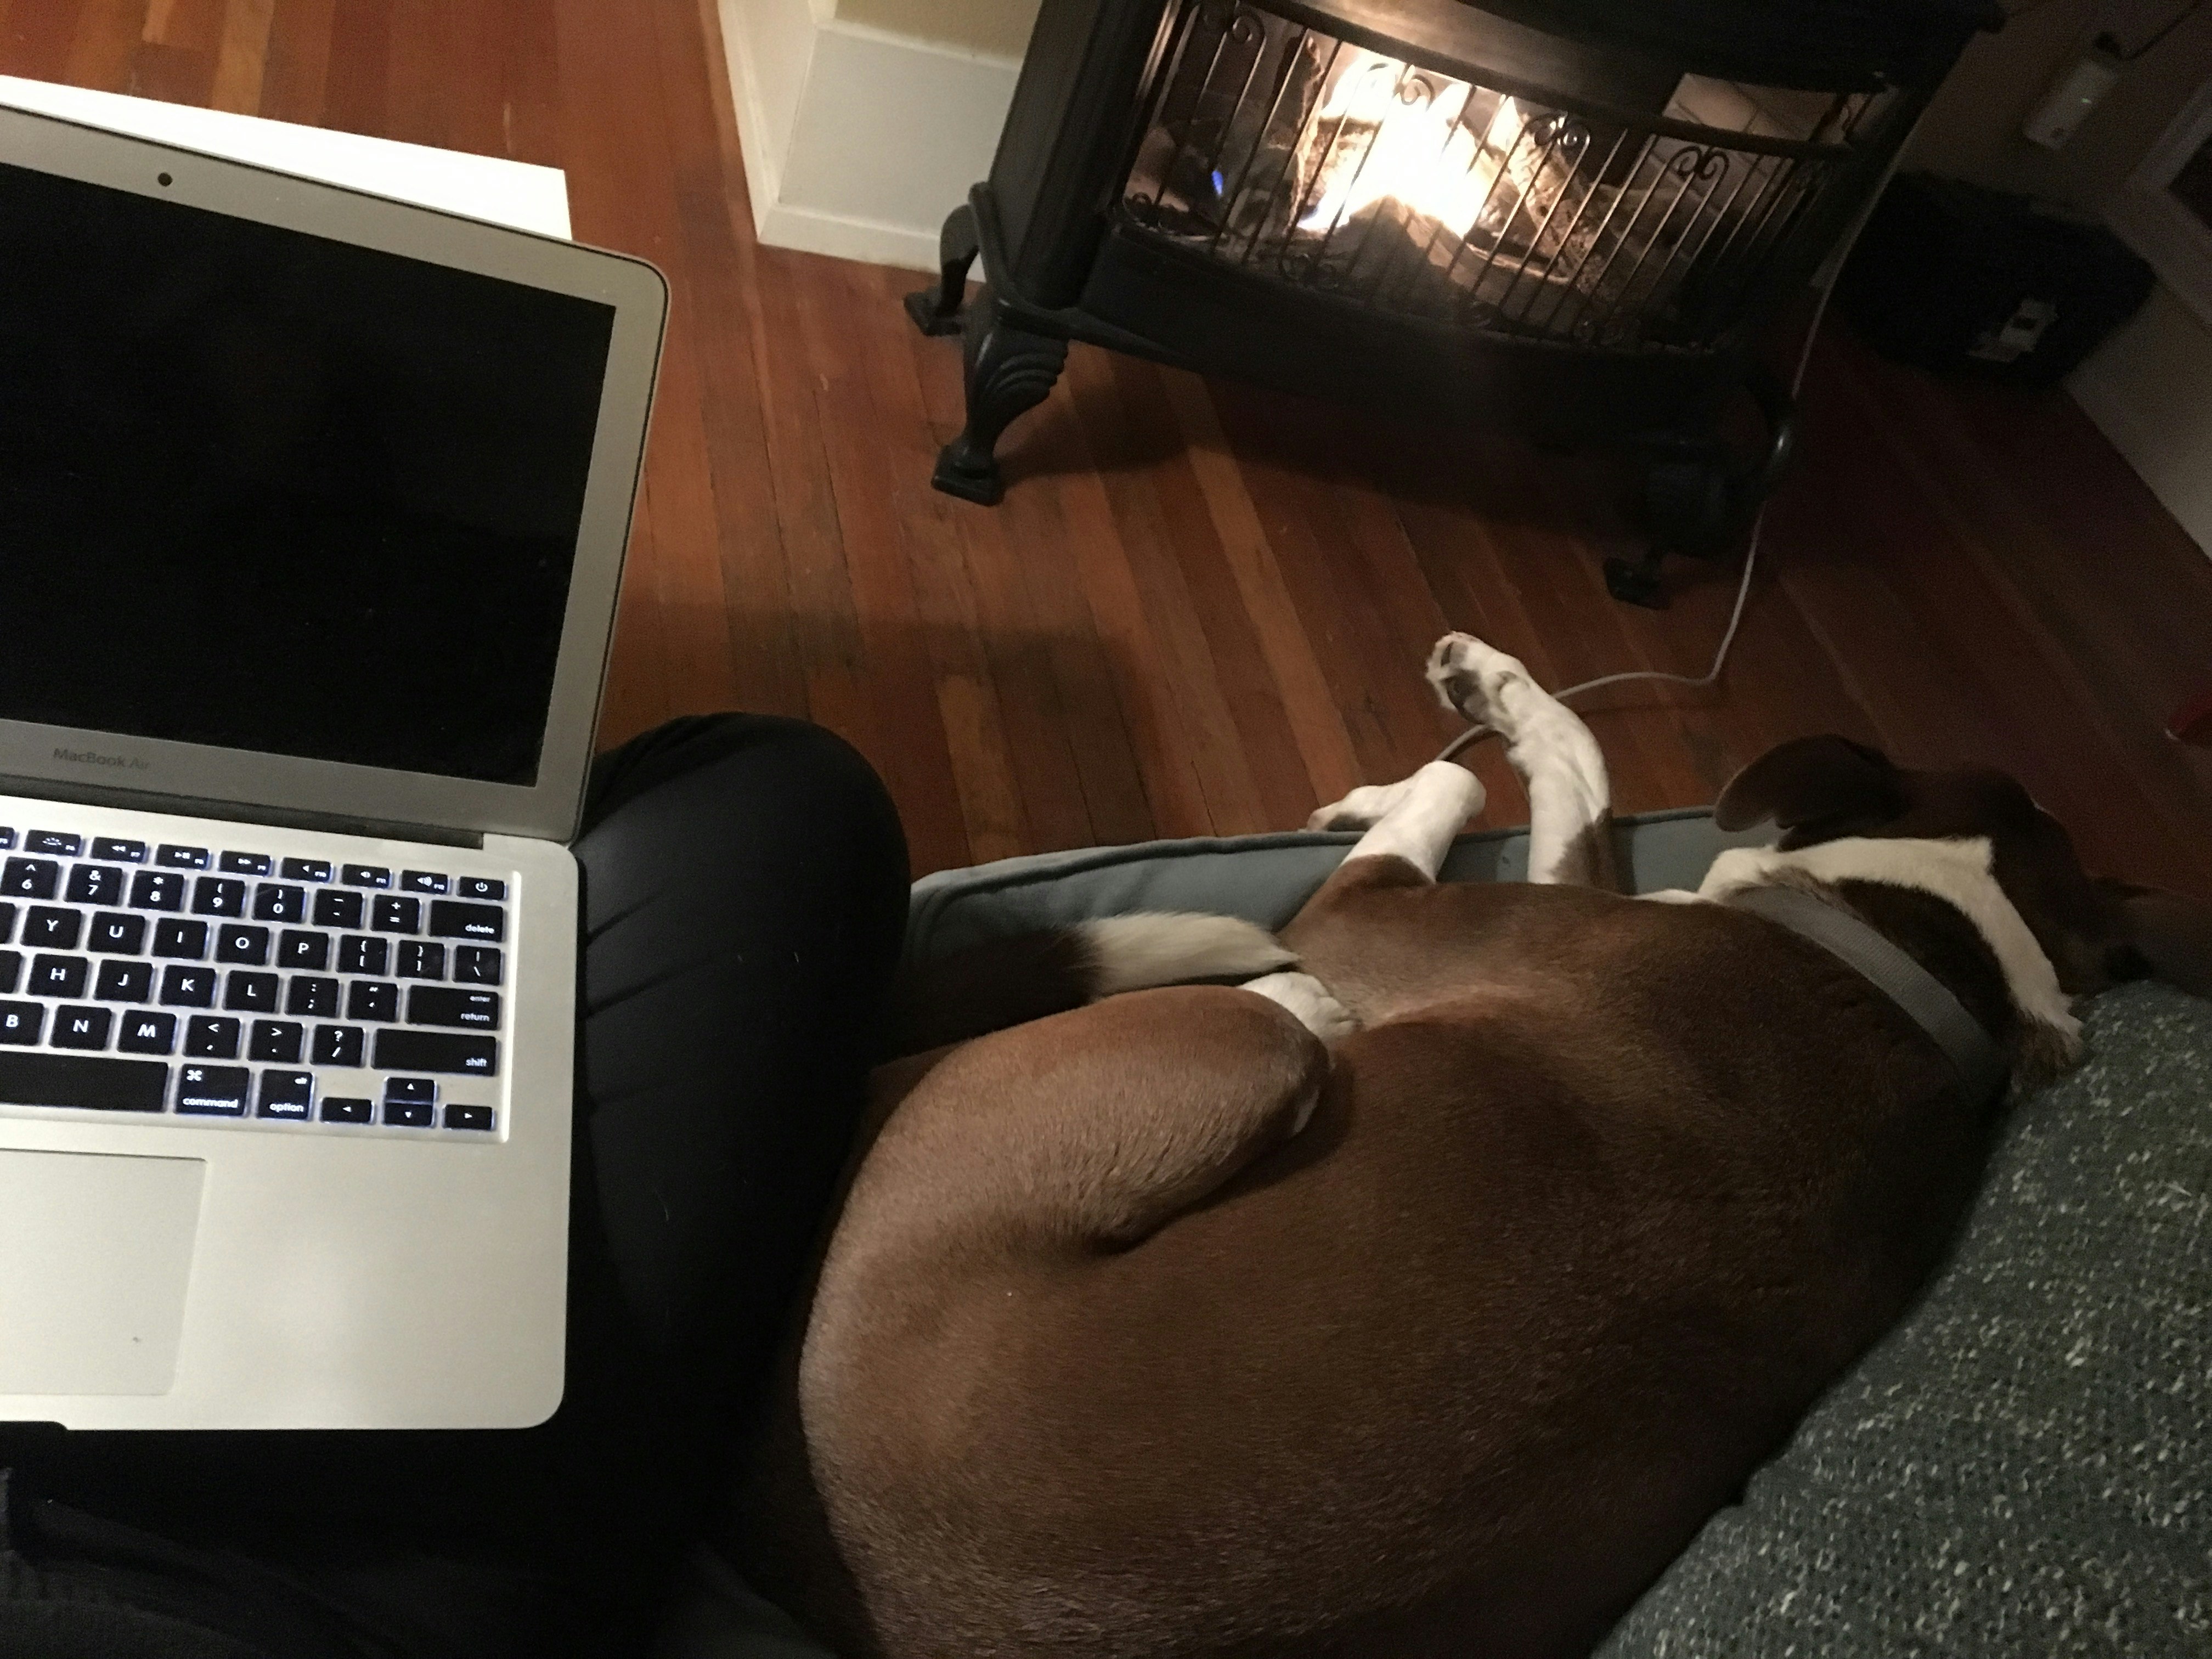 Jackson the dog naps on the sofa next to Britany Robinson, who has a silver laptop sitting on her legs next to a fireplace